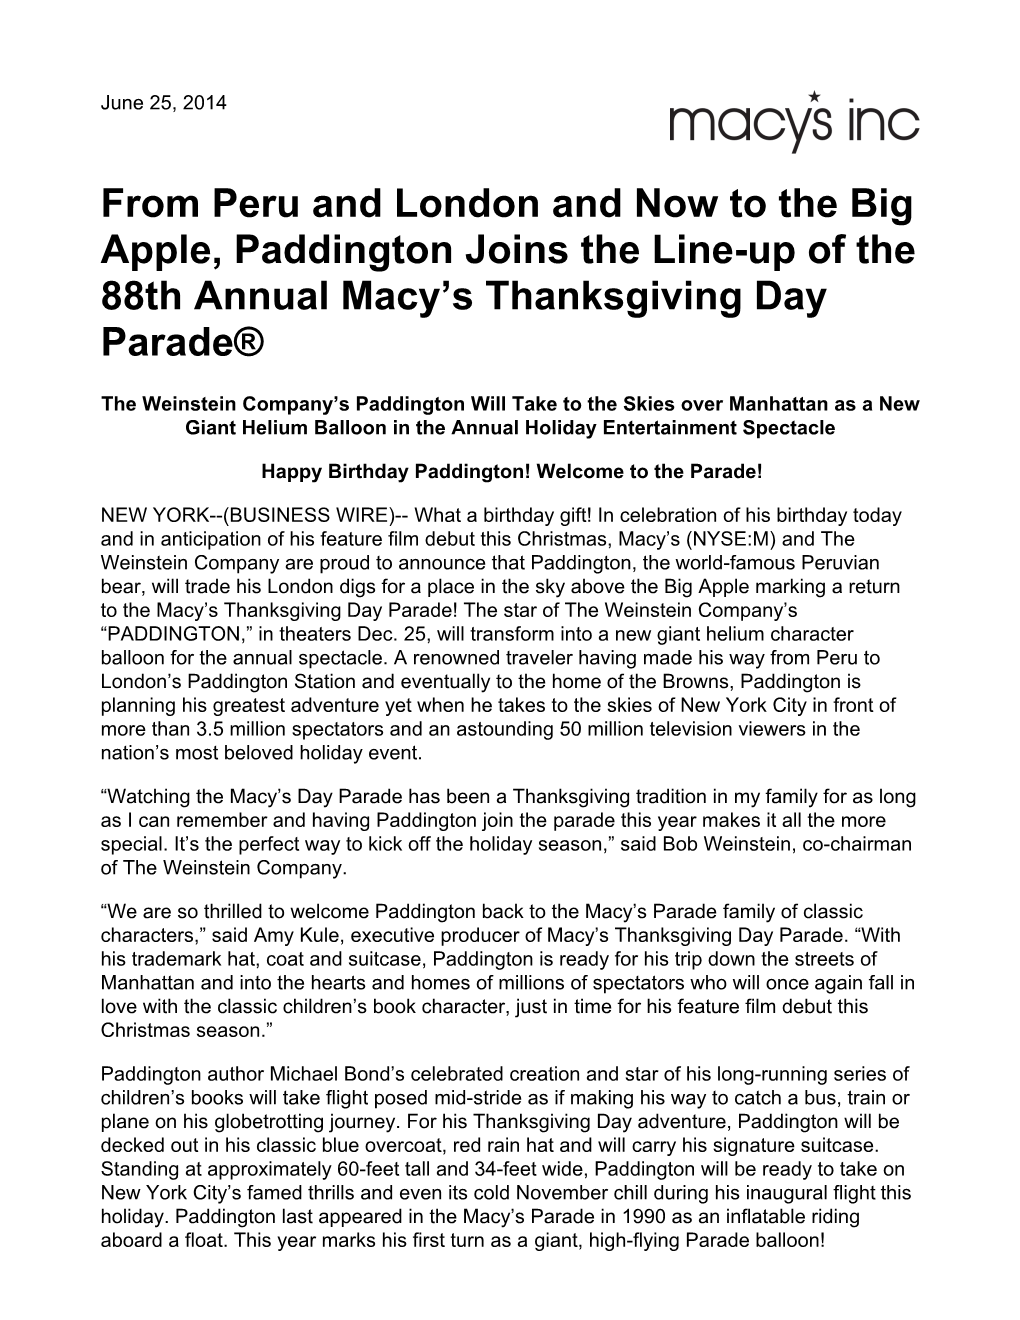 From Peru and London and Now to the Big Apple, Paddington Joins the Line-Up of the 88Th Annual Macy’S Thanksgiving Day Parade®